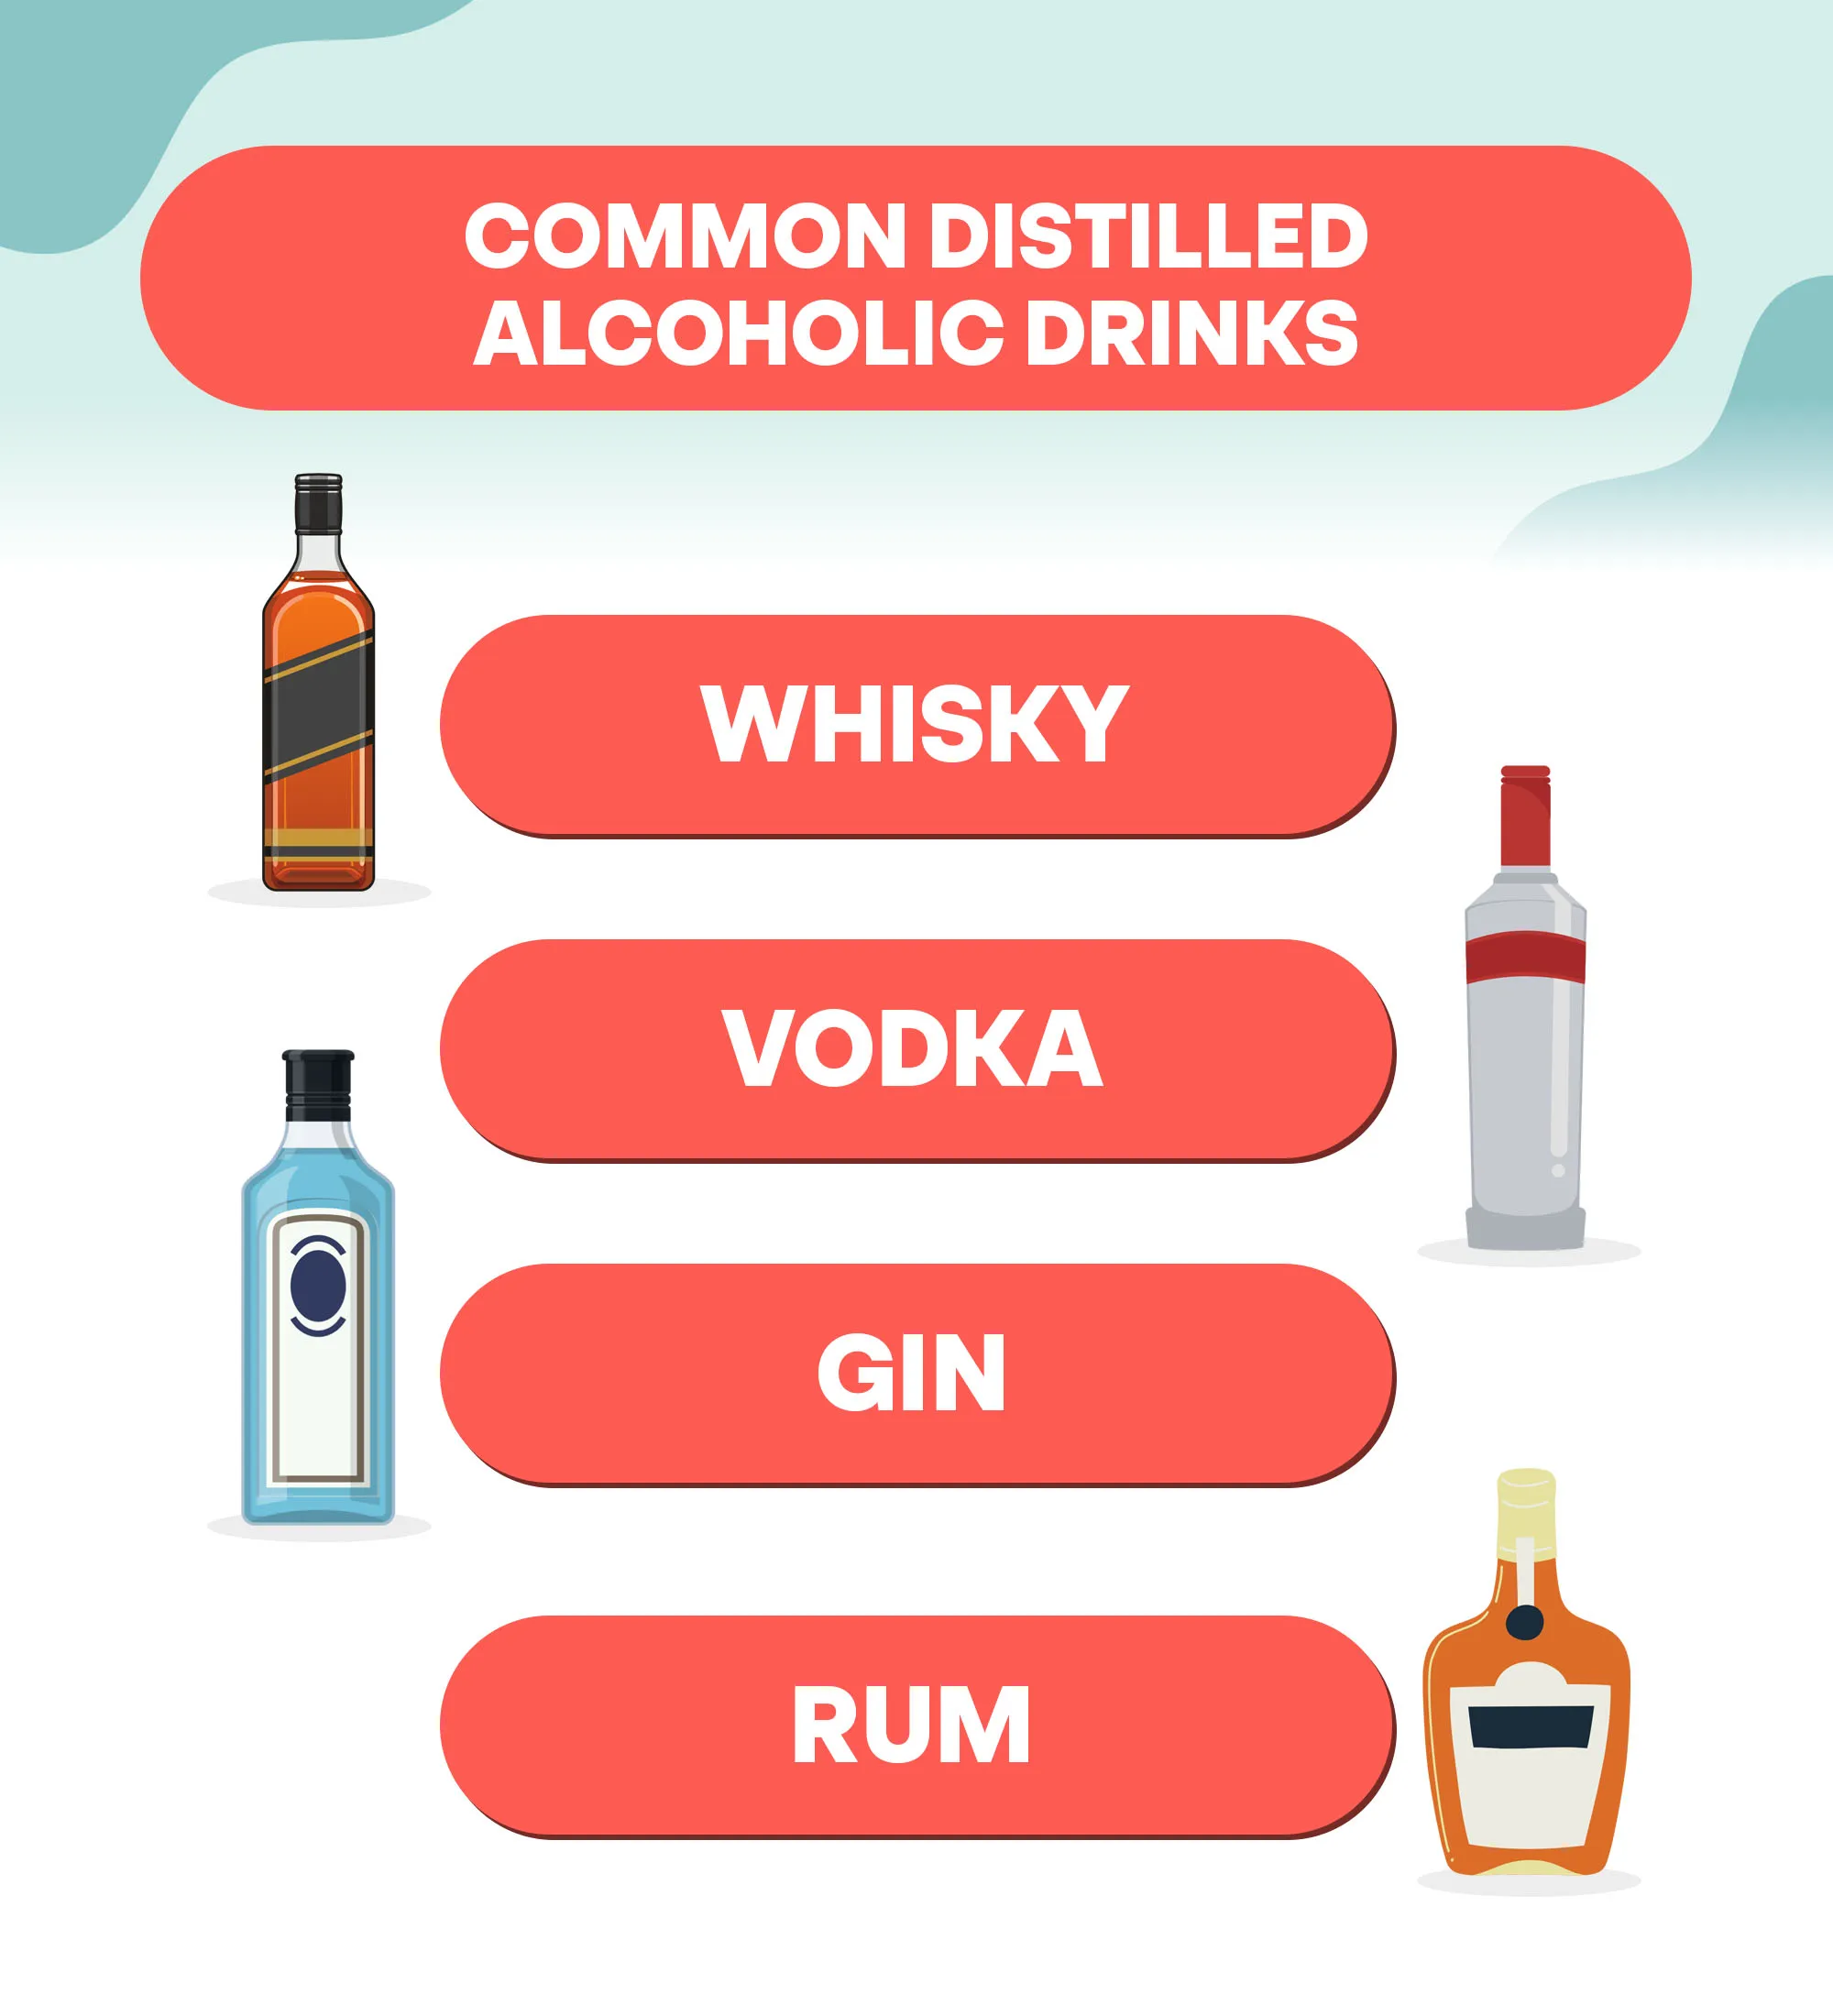 At what temperature should you drink spirits, from Scotch to gin?